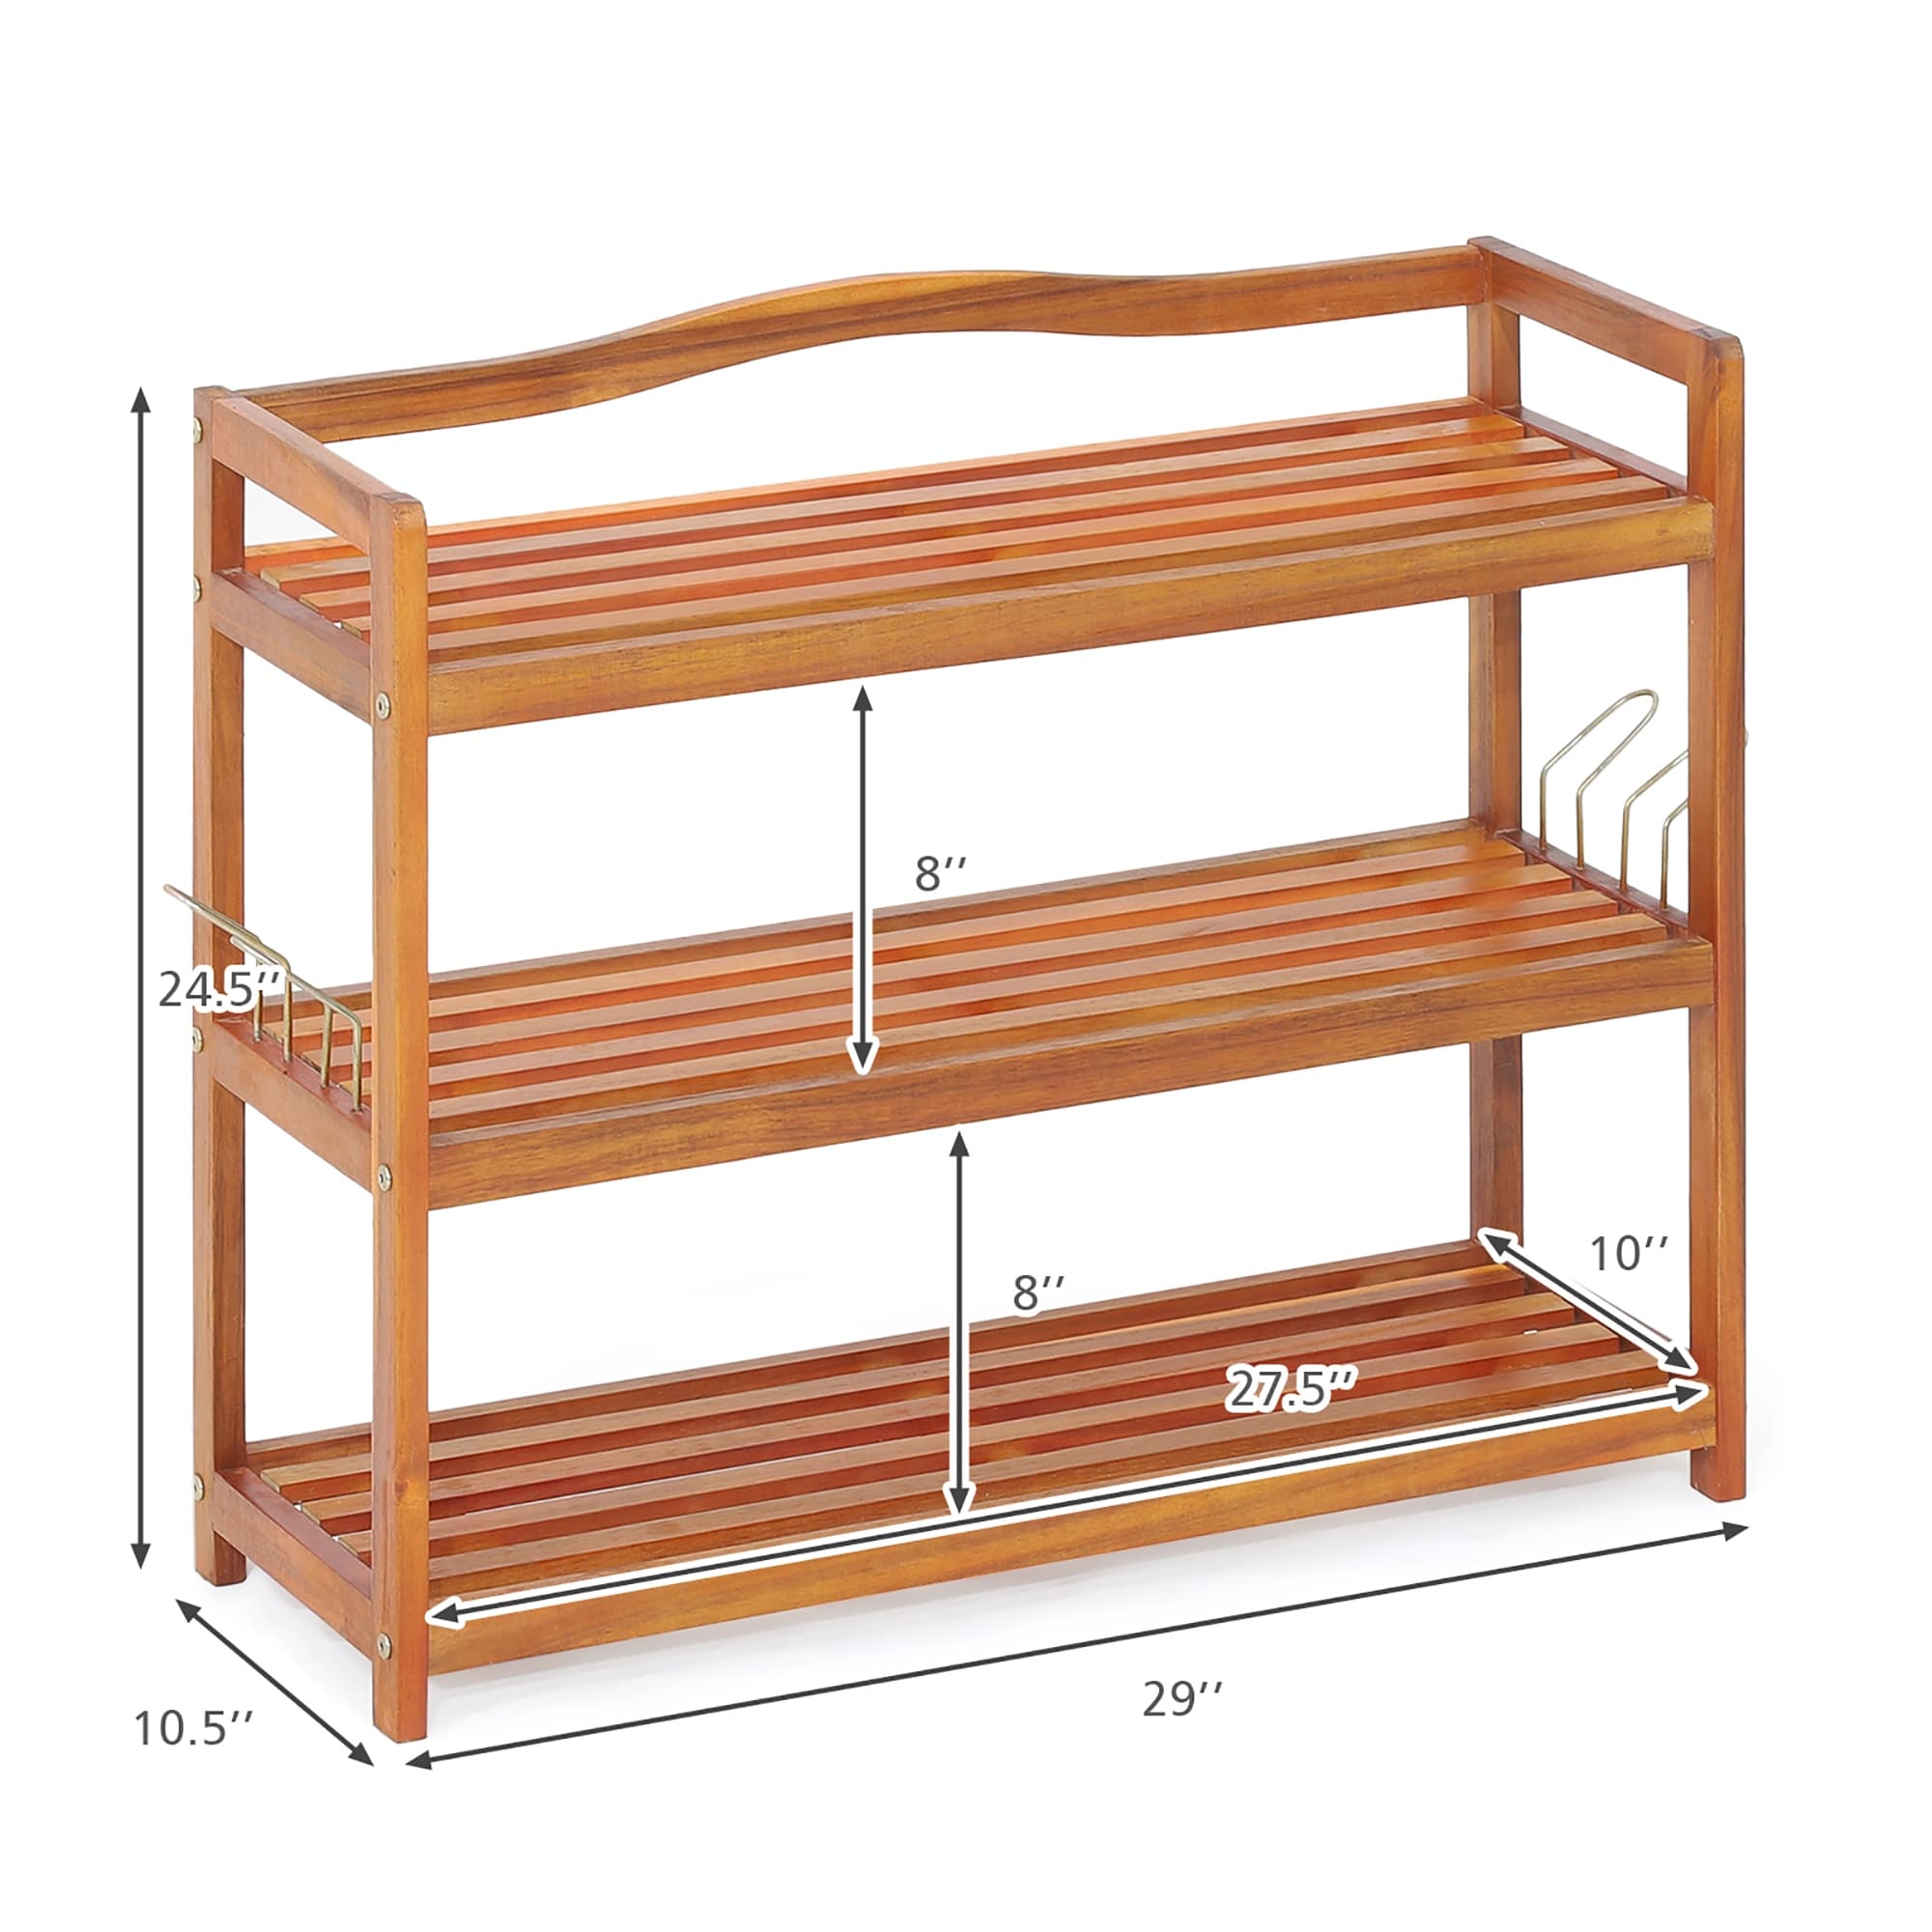 https://ak1.ostkcdn.com/images/products/is/images/direct/57d74c0fe3155bb5a52942243b68a5d1fb0e510a/Costway-3-Tier-Wood-Shoe-Rack-Solid-Acacia-Wood-Shoe-Shelf-with-Side.jpg